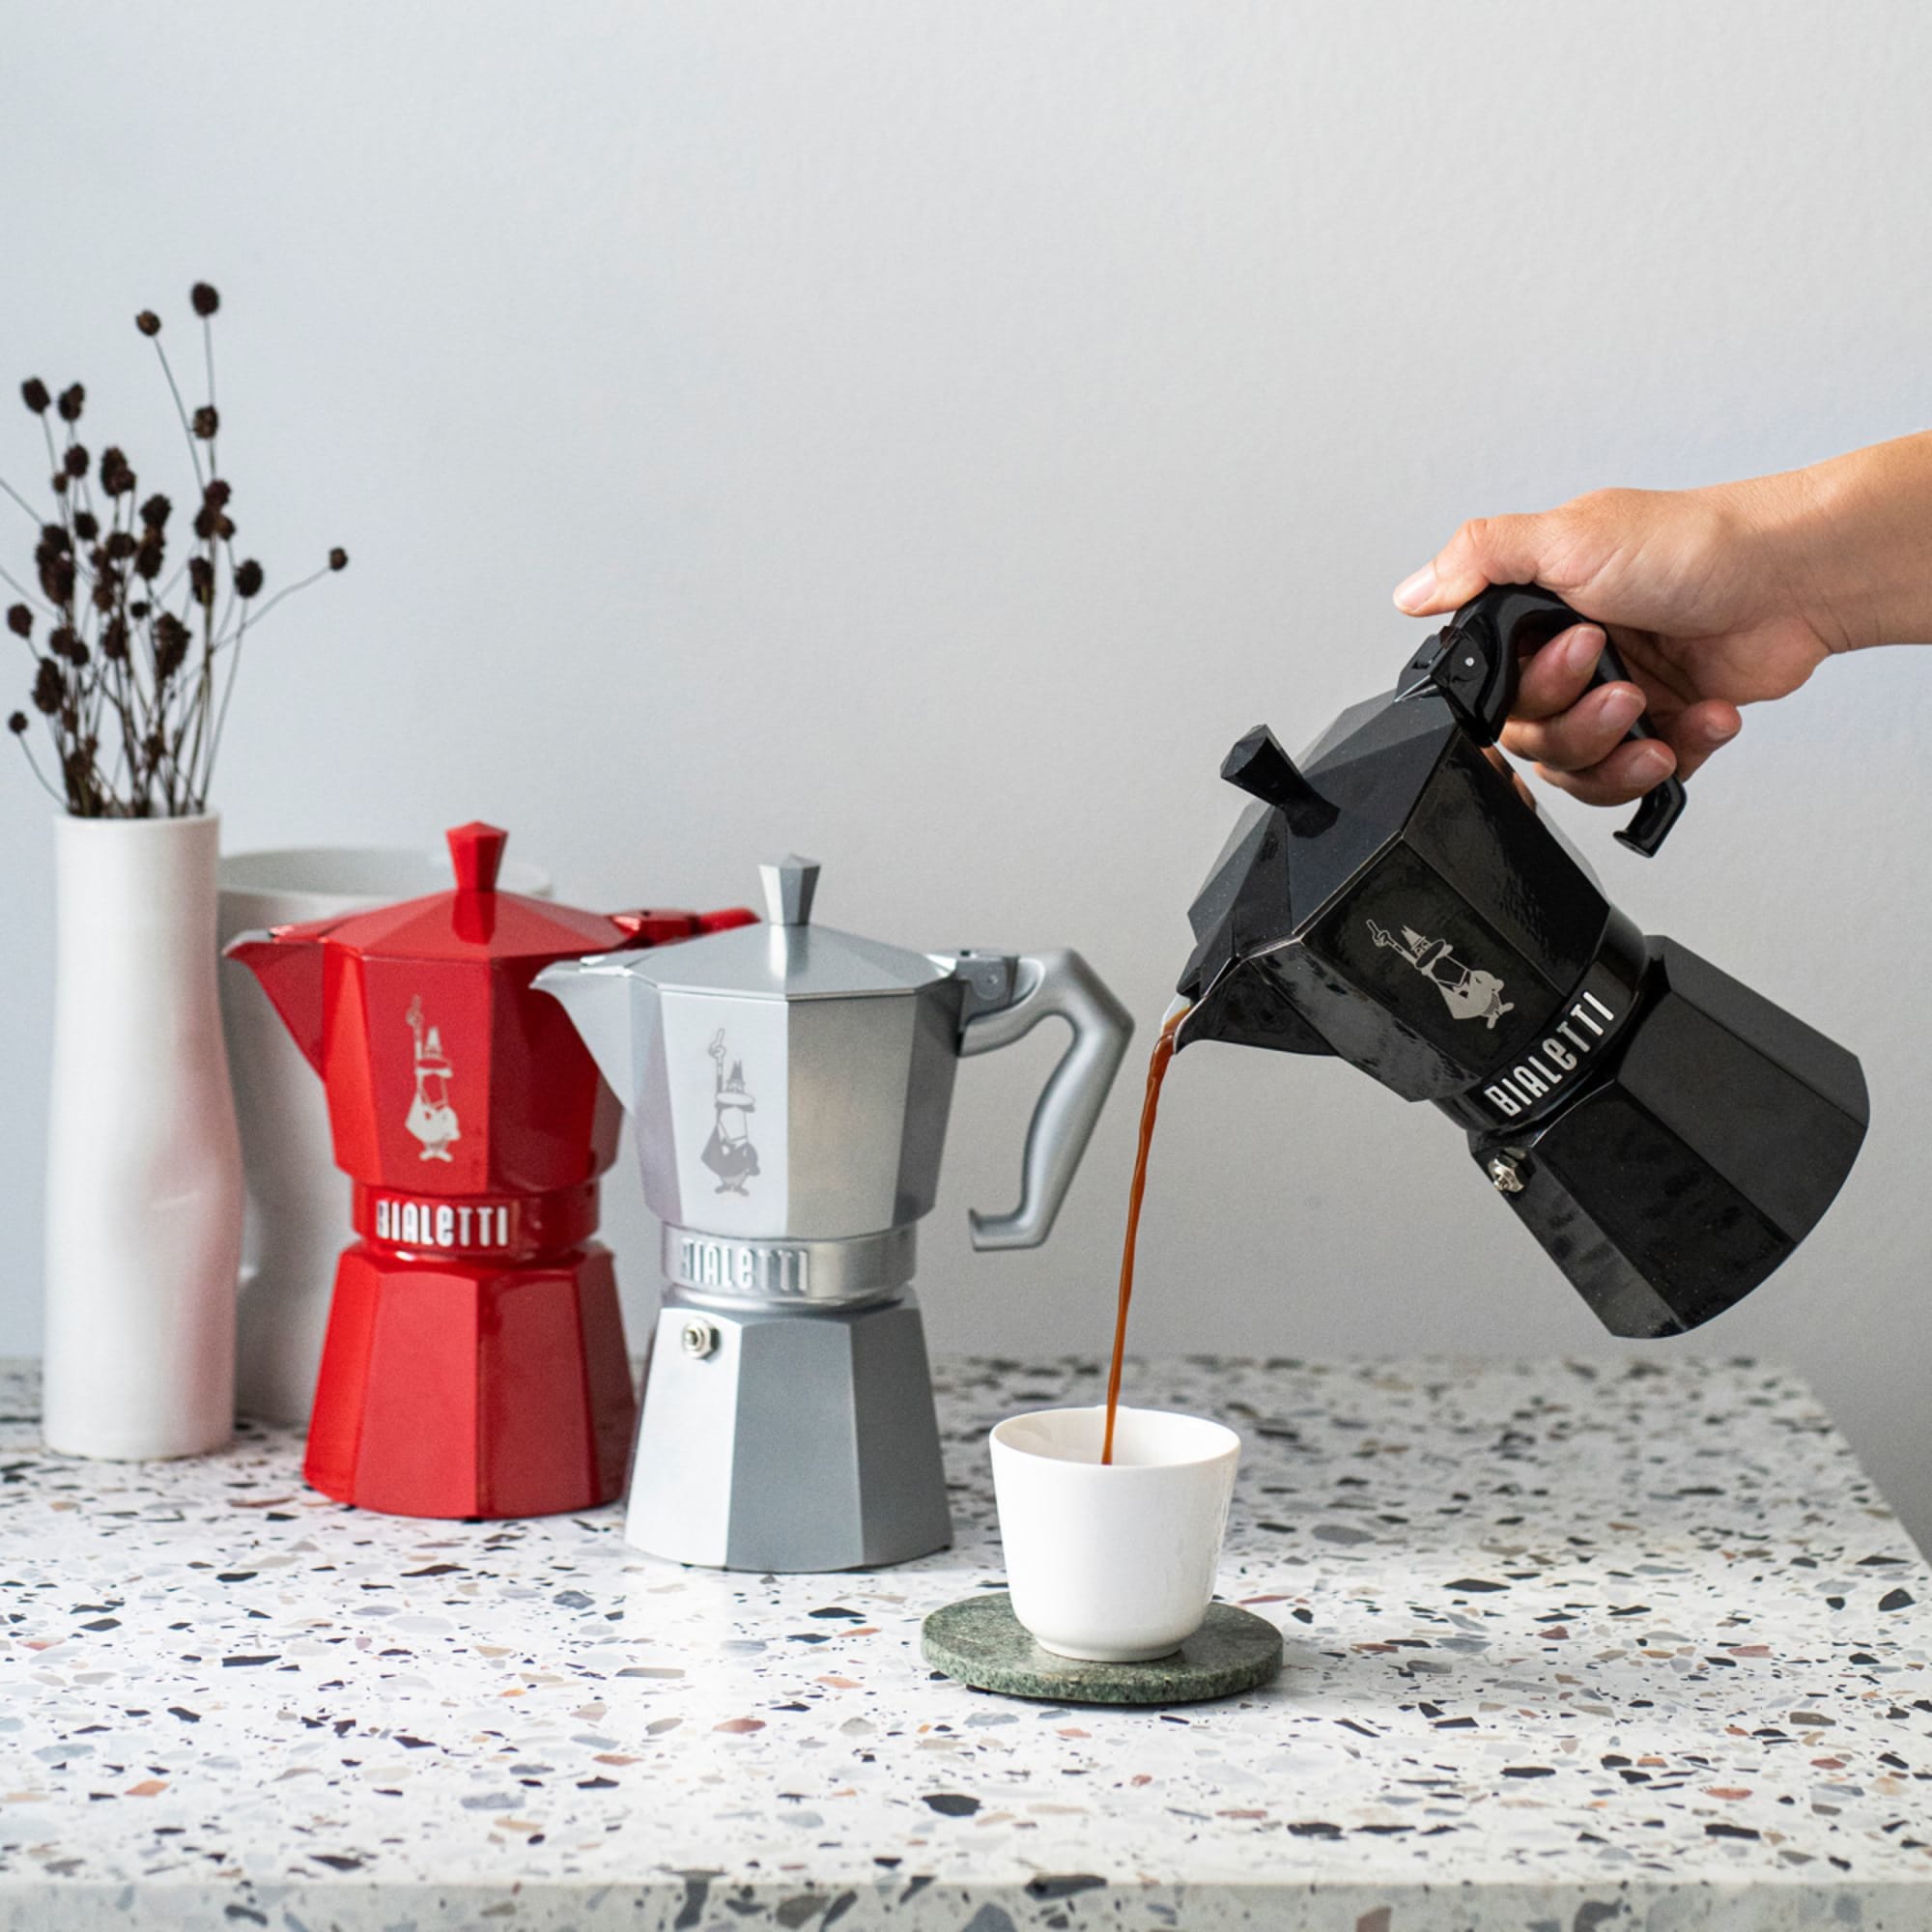 https://res.cloudinary.com/kitchenwarehouse/image/upload/c_fill,g_face,w_1250/f_auto/t_PDP_2000x2000/Supplier%20Images%20/2000px/Bialetti-Moka-Exclusive-Stovetop-Expresso-Maker-6-Cup-Black_2_2000px.jpg